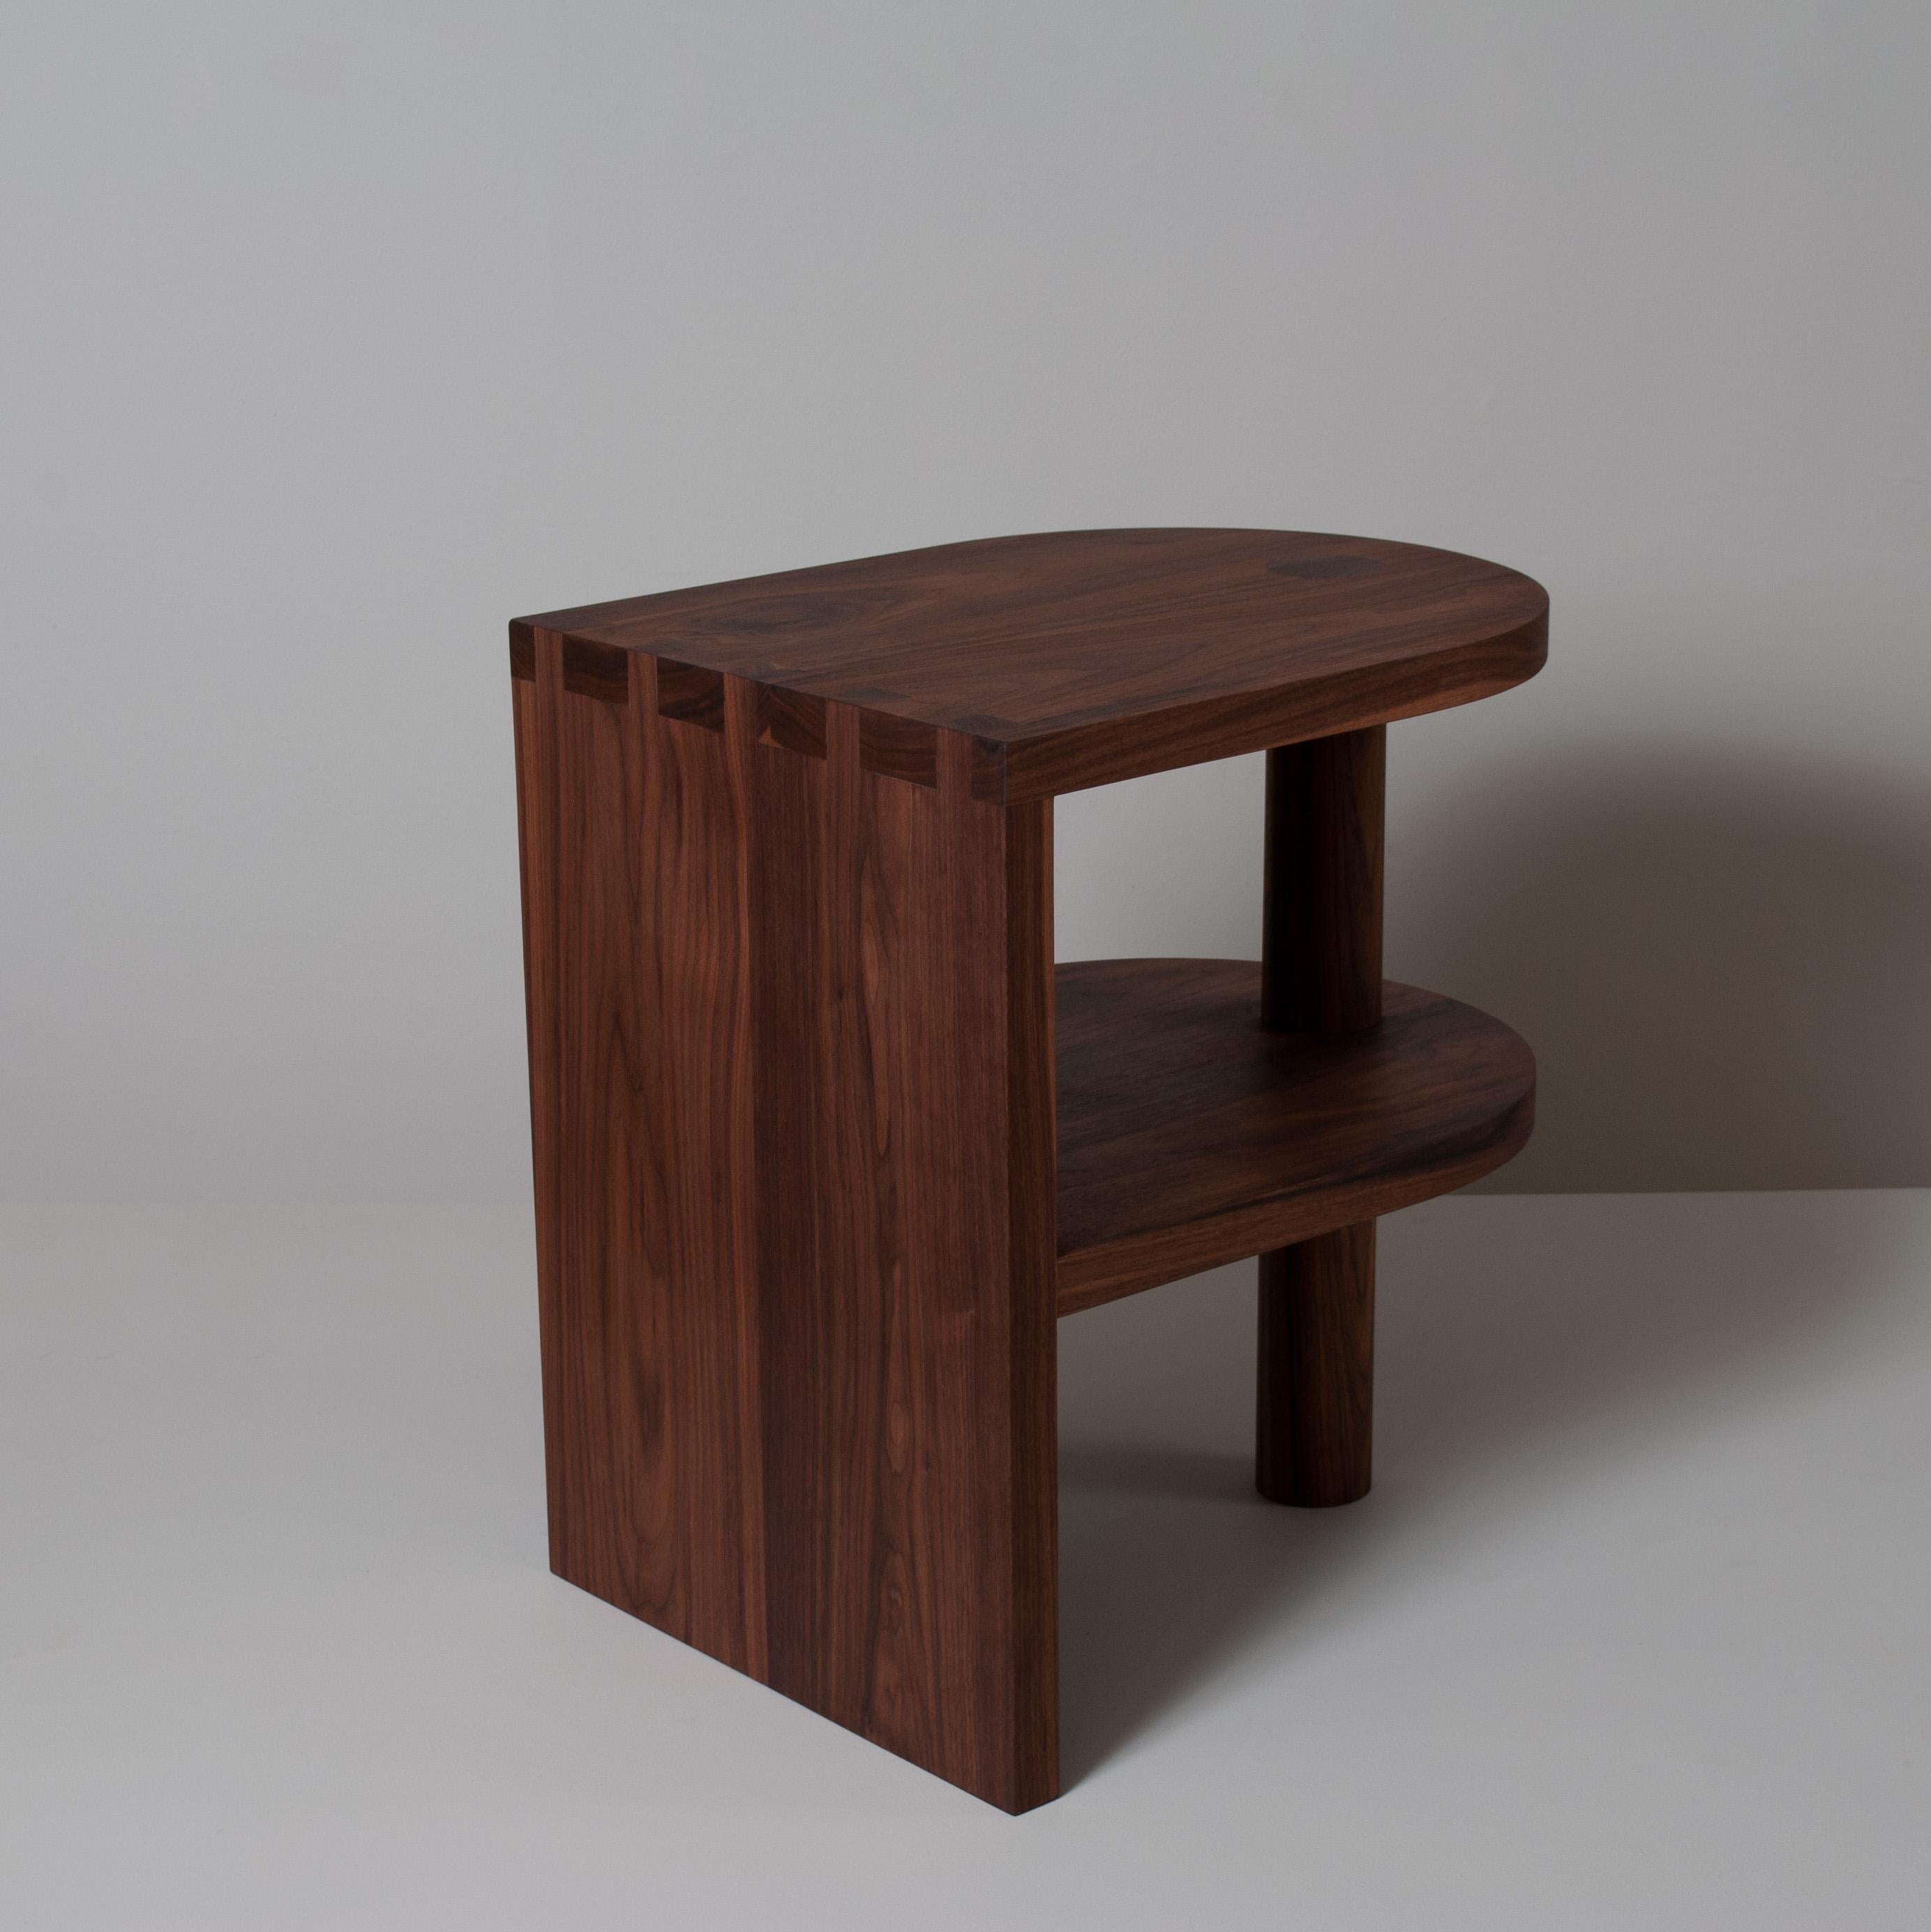 Handcrafted architectural American black walnut nightstand. Designed at Sum furniture and handcrafted using traditional furniture making techniques with the finest American Black Walnut. Hand-cut oversized dovetail jointing detail with a thick